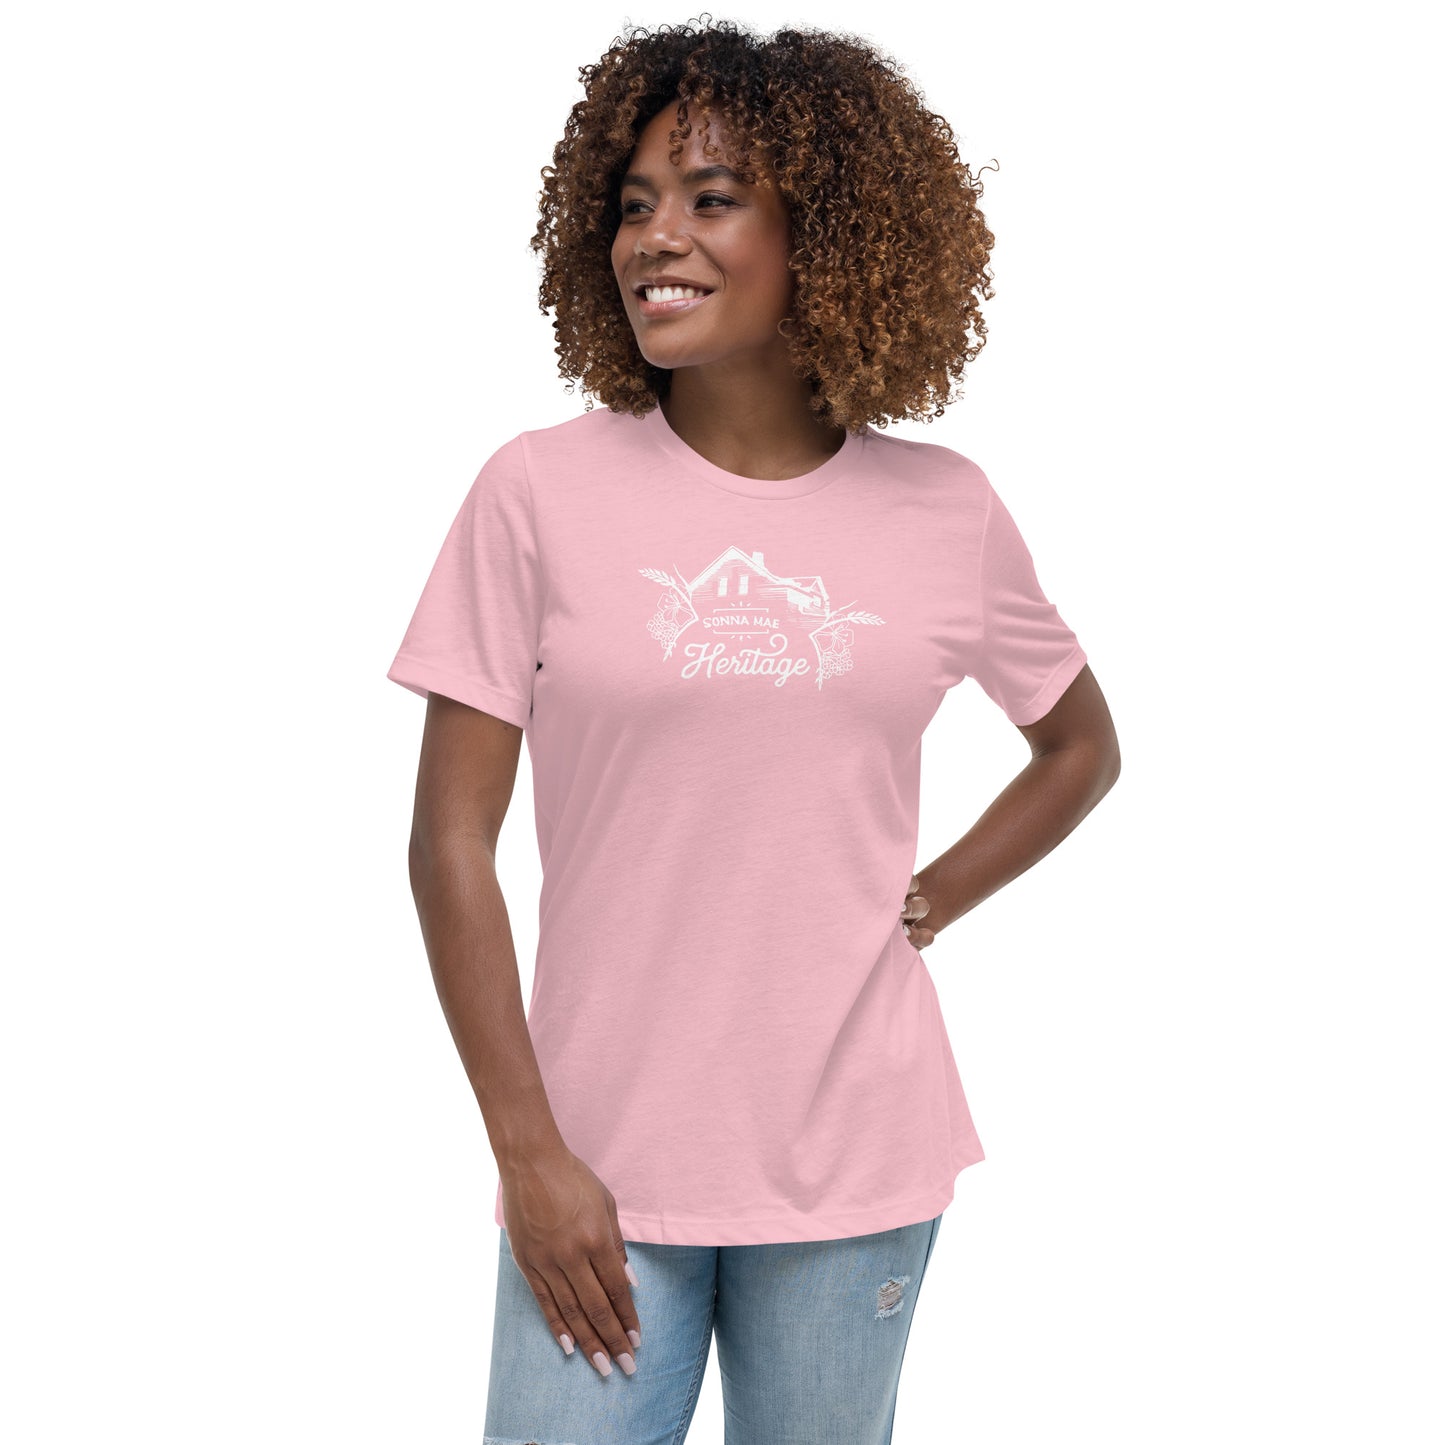 "go slow" Womens Relaxed Tee